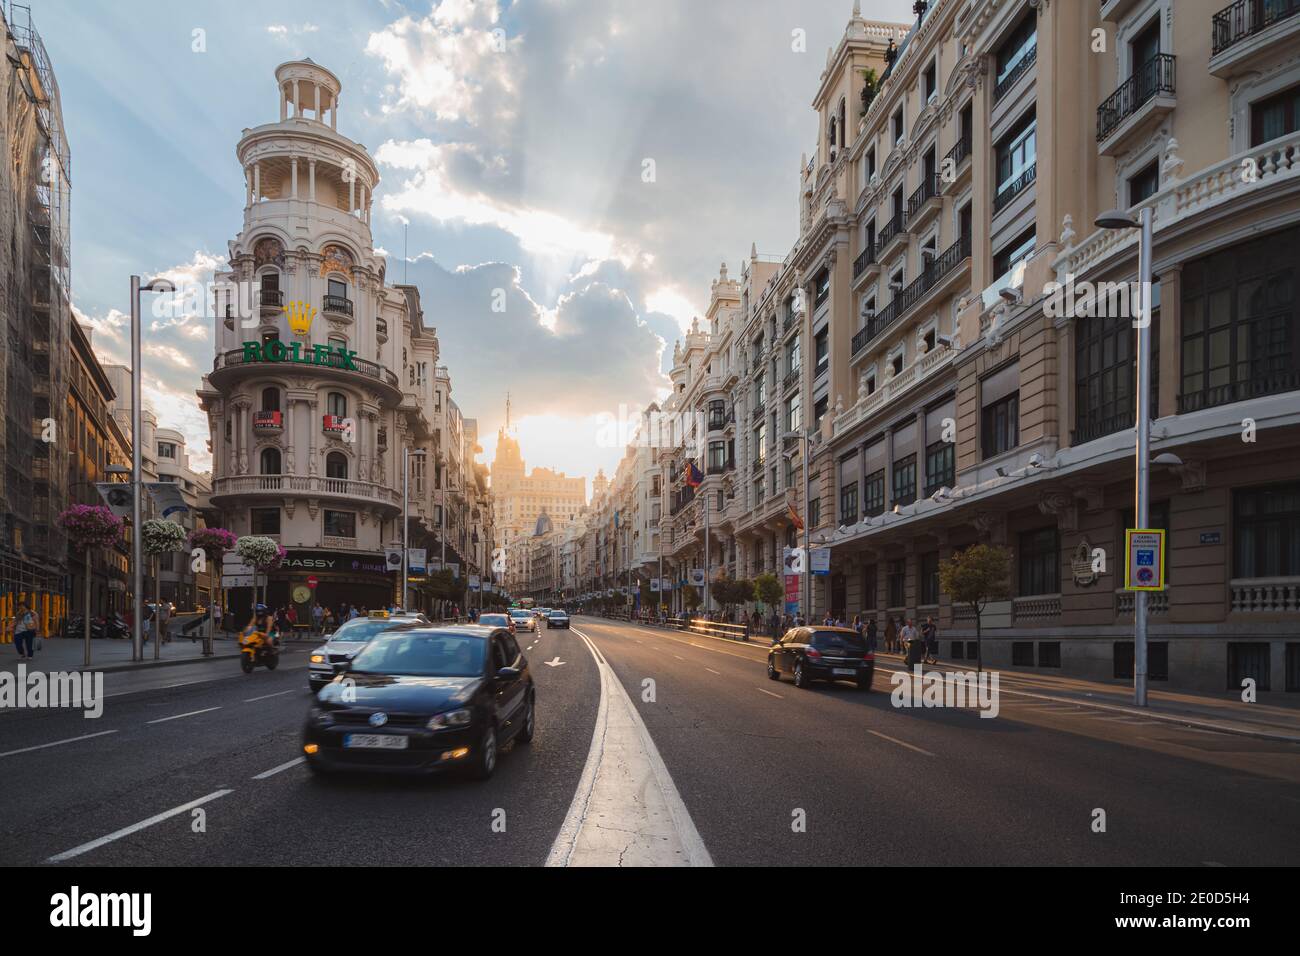 Madrid, Spain - June 7 2015: Evening traffic along the busy shopping street of Gran Via in the Spanish capital Madrid. Stock Photo